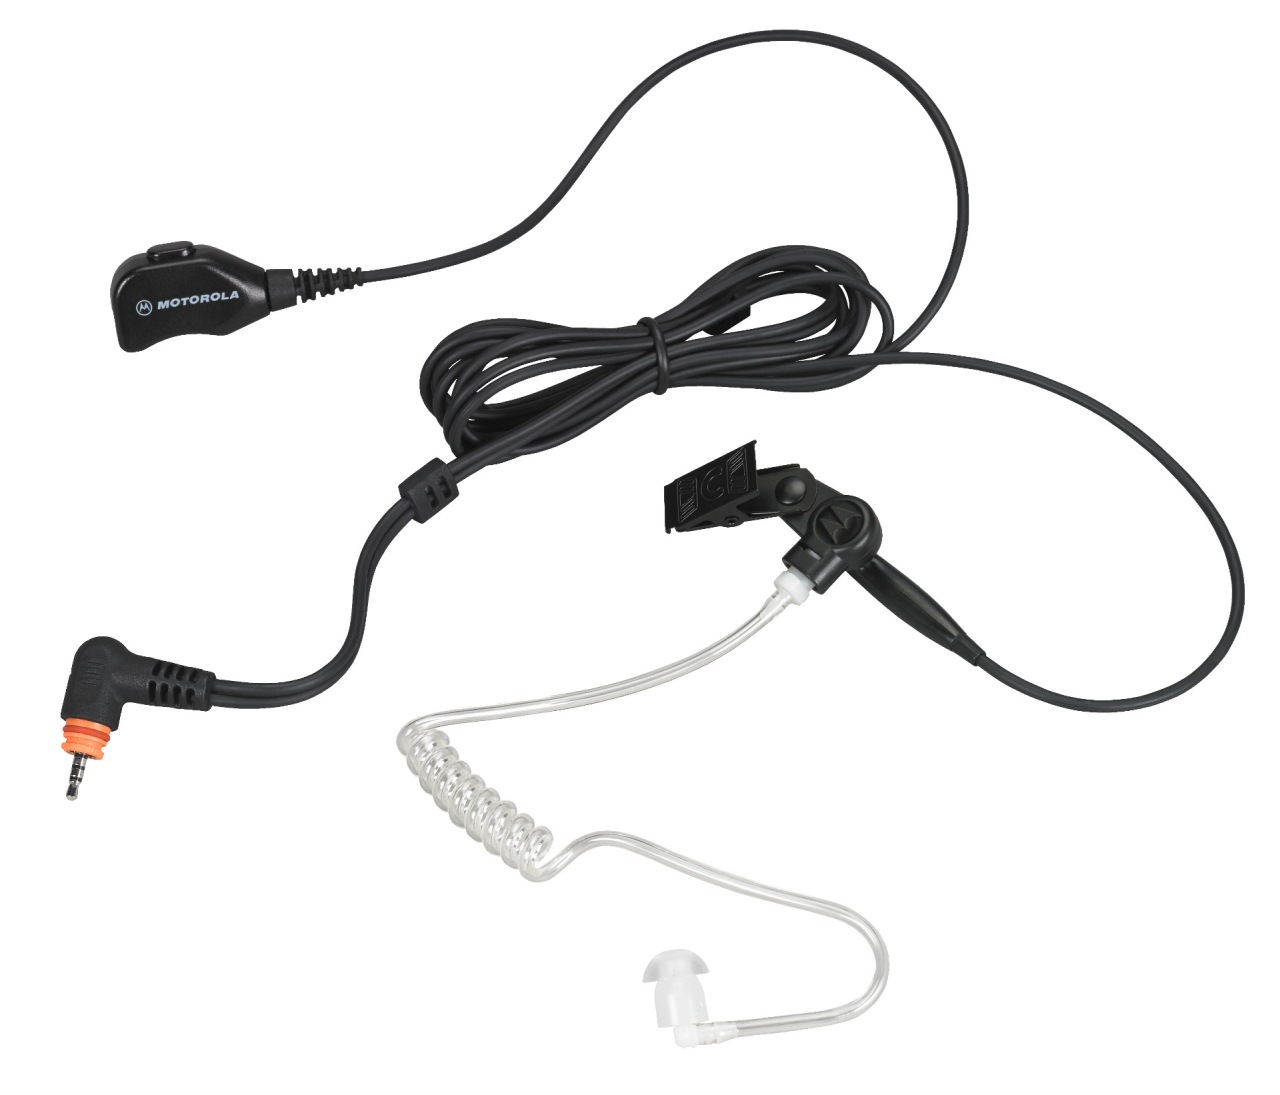 Motorola 2-Wire Earpiece with clear acoustic tube Black PMLN7157A